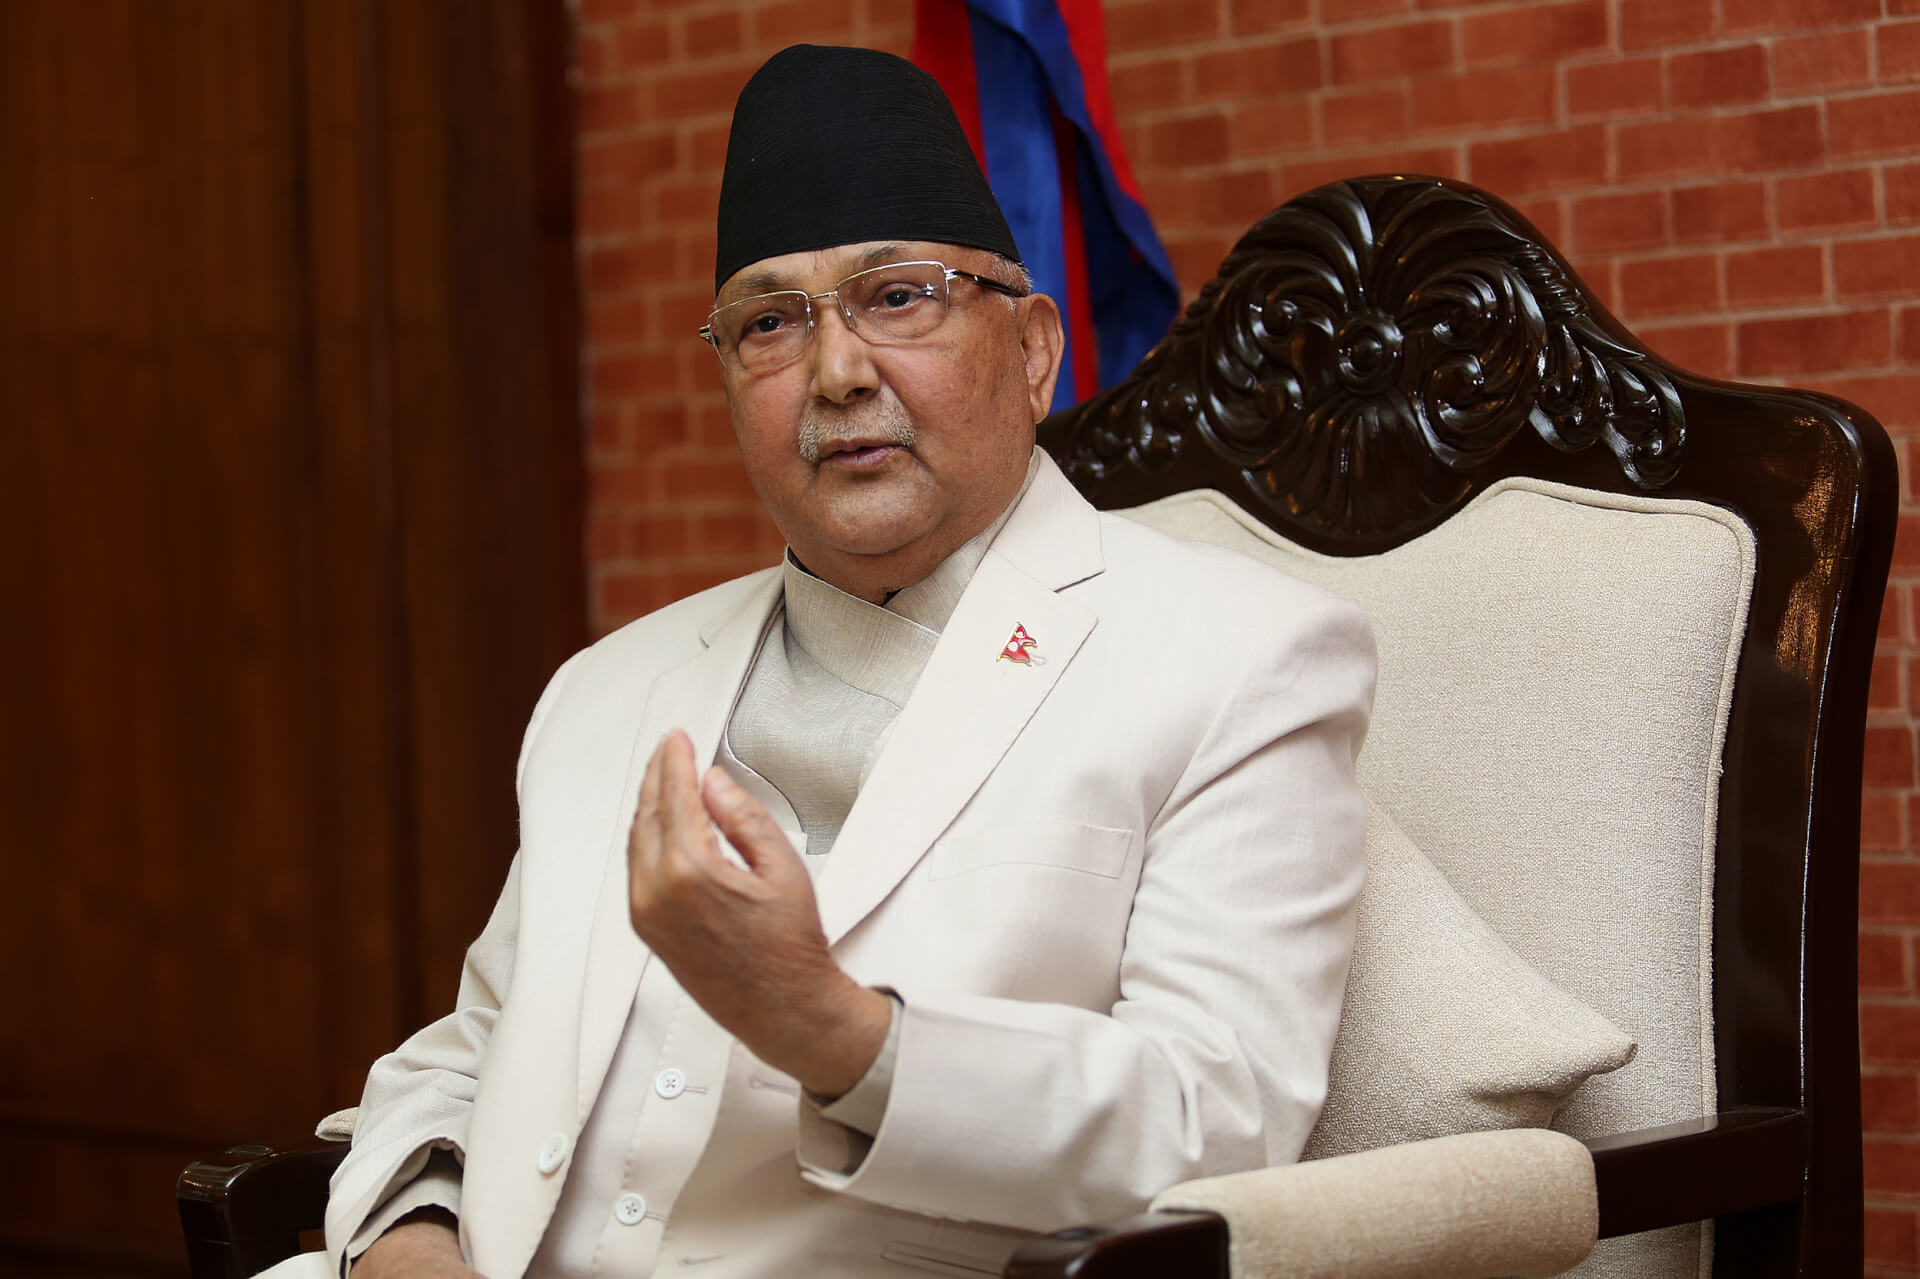 Nepalese PM Oli Reshuffles Cabinet Amidst Rising Criticism From Within His Party